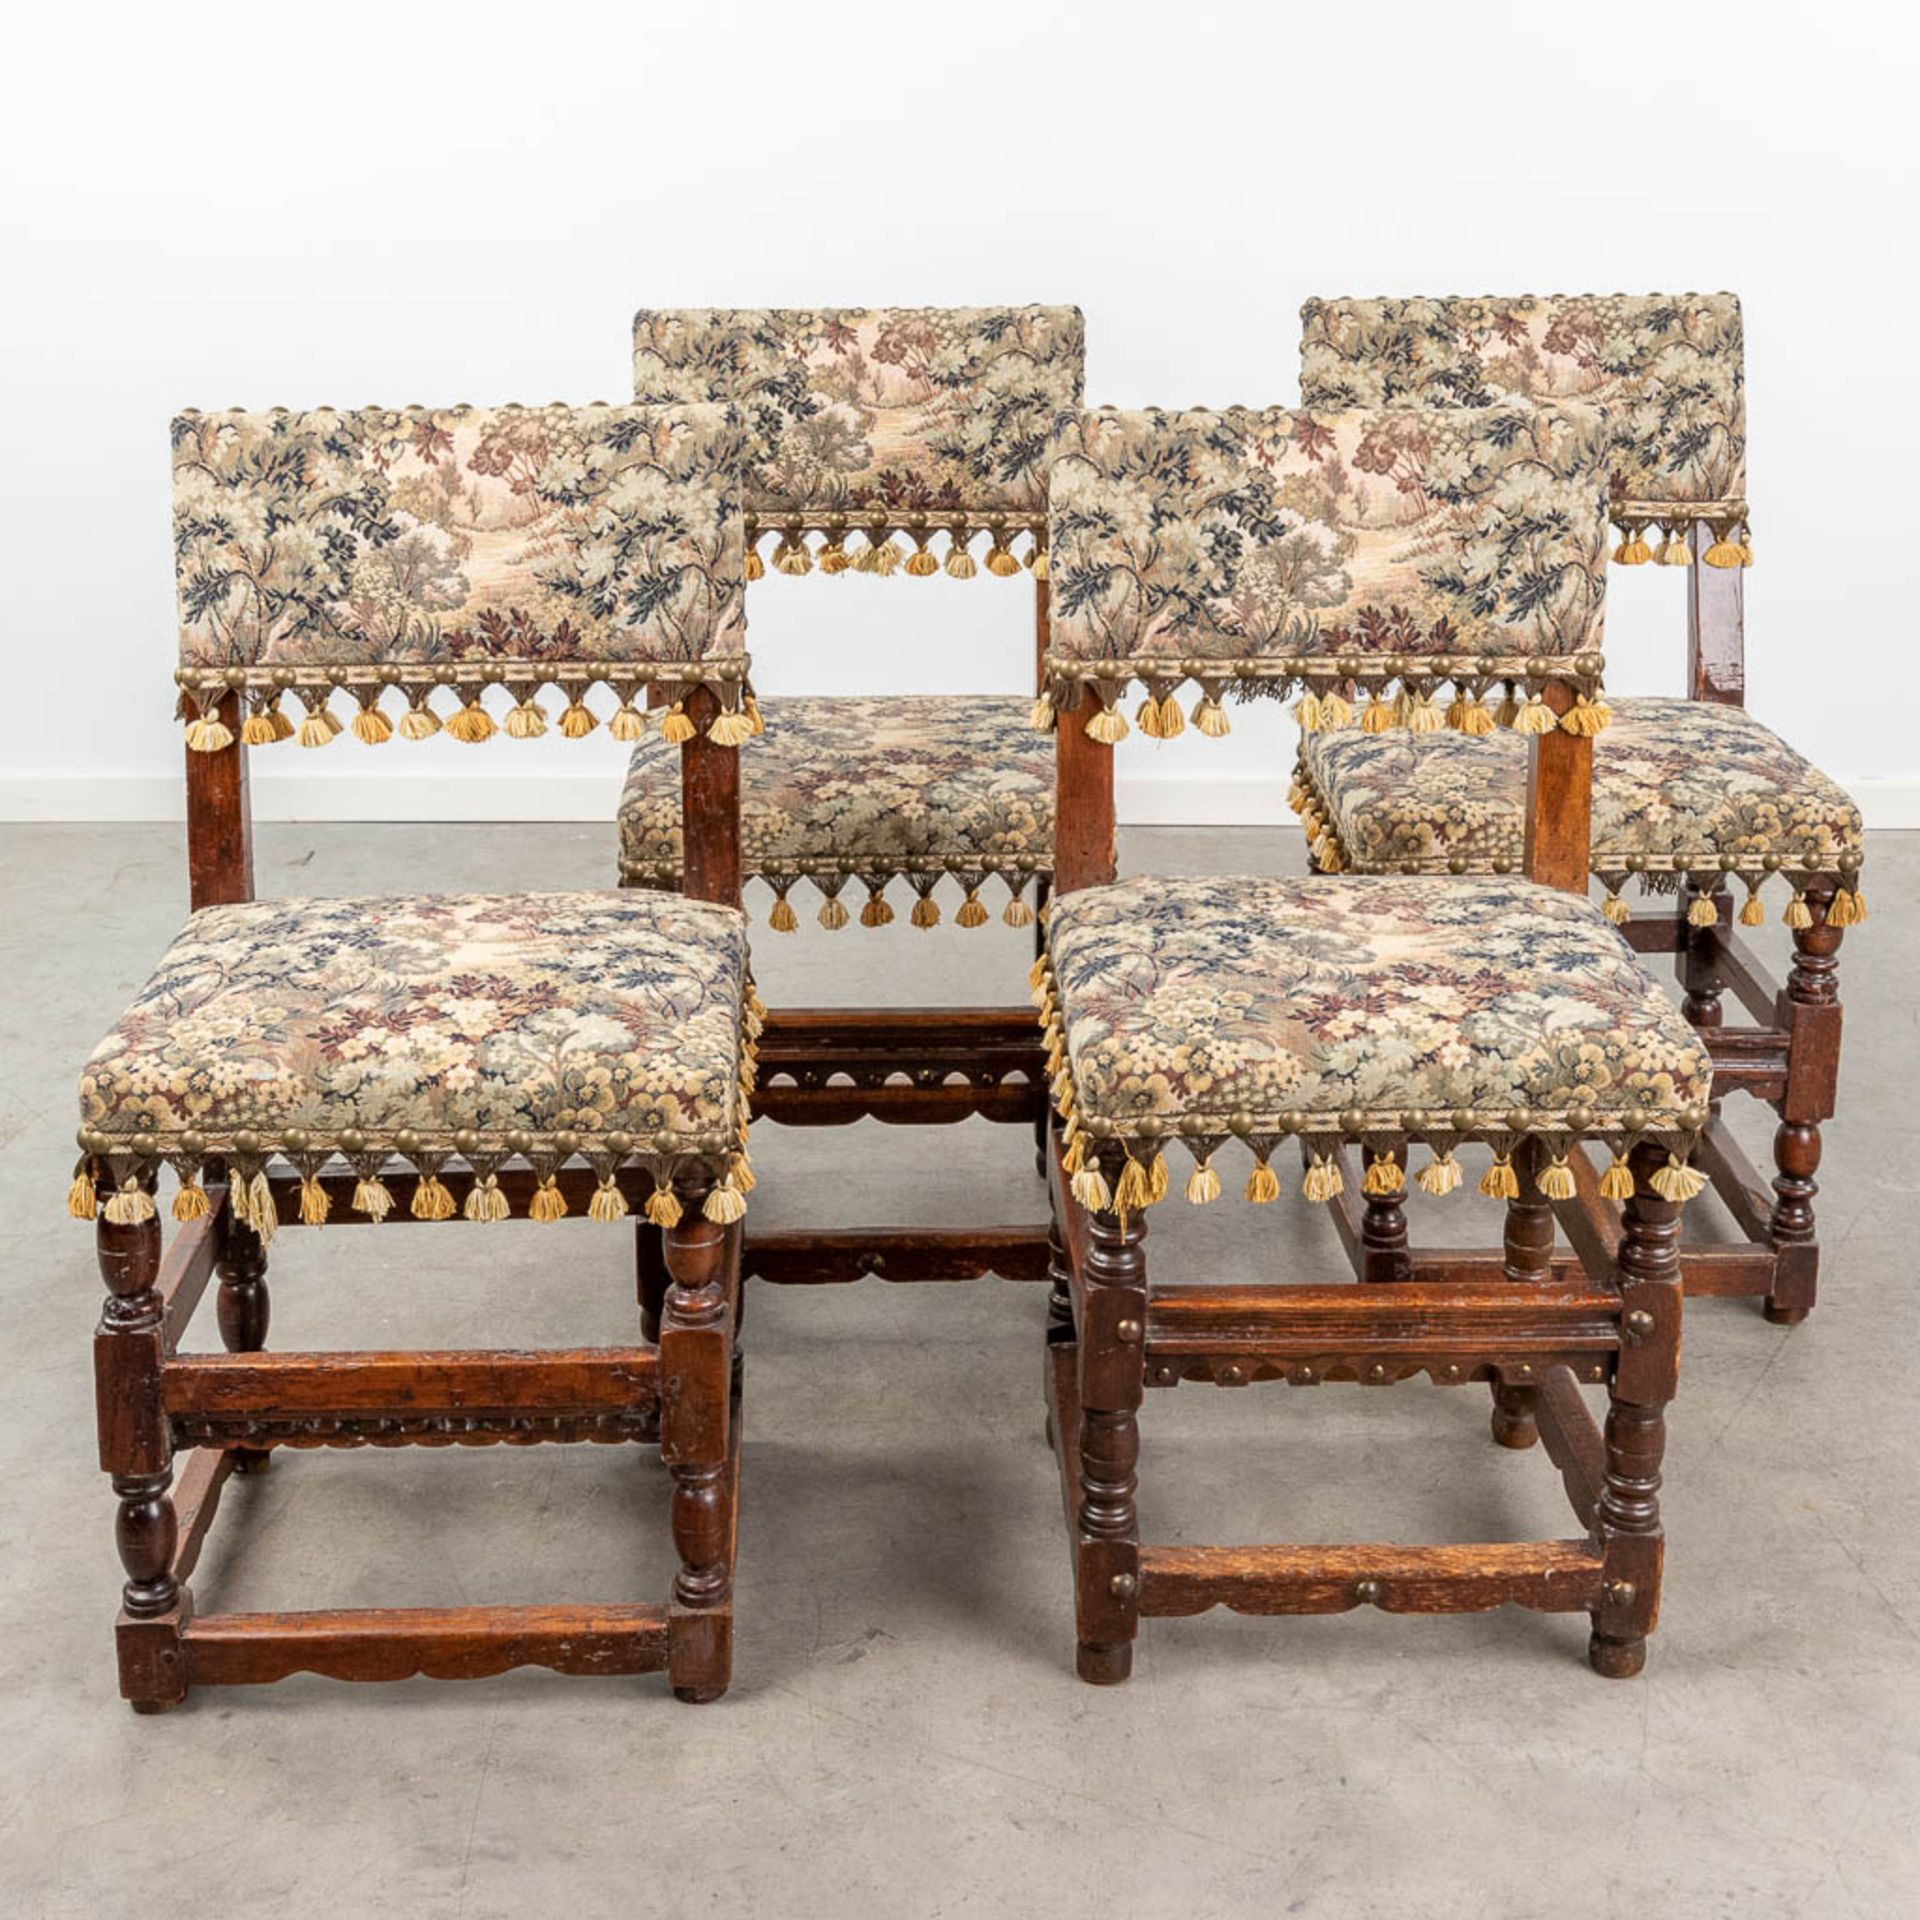 A set of 4 antique chairs, covered with tapestry upholstery. (L:40 x W:44 x H:88 cm)